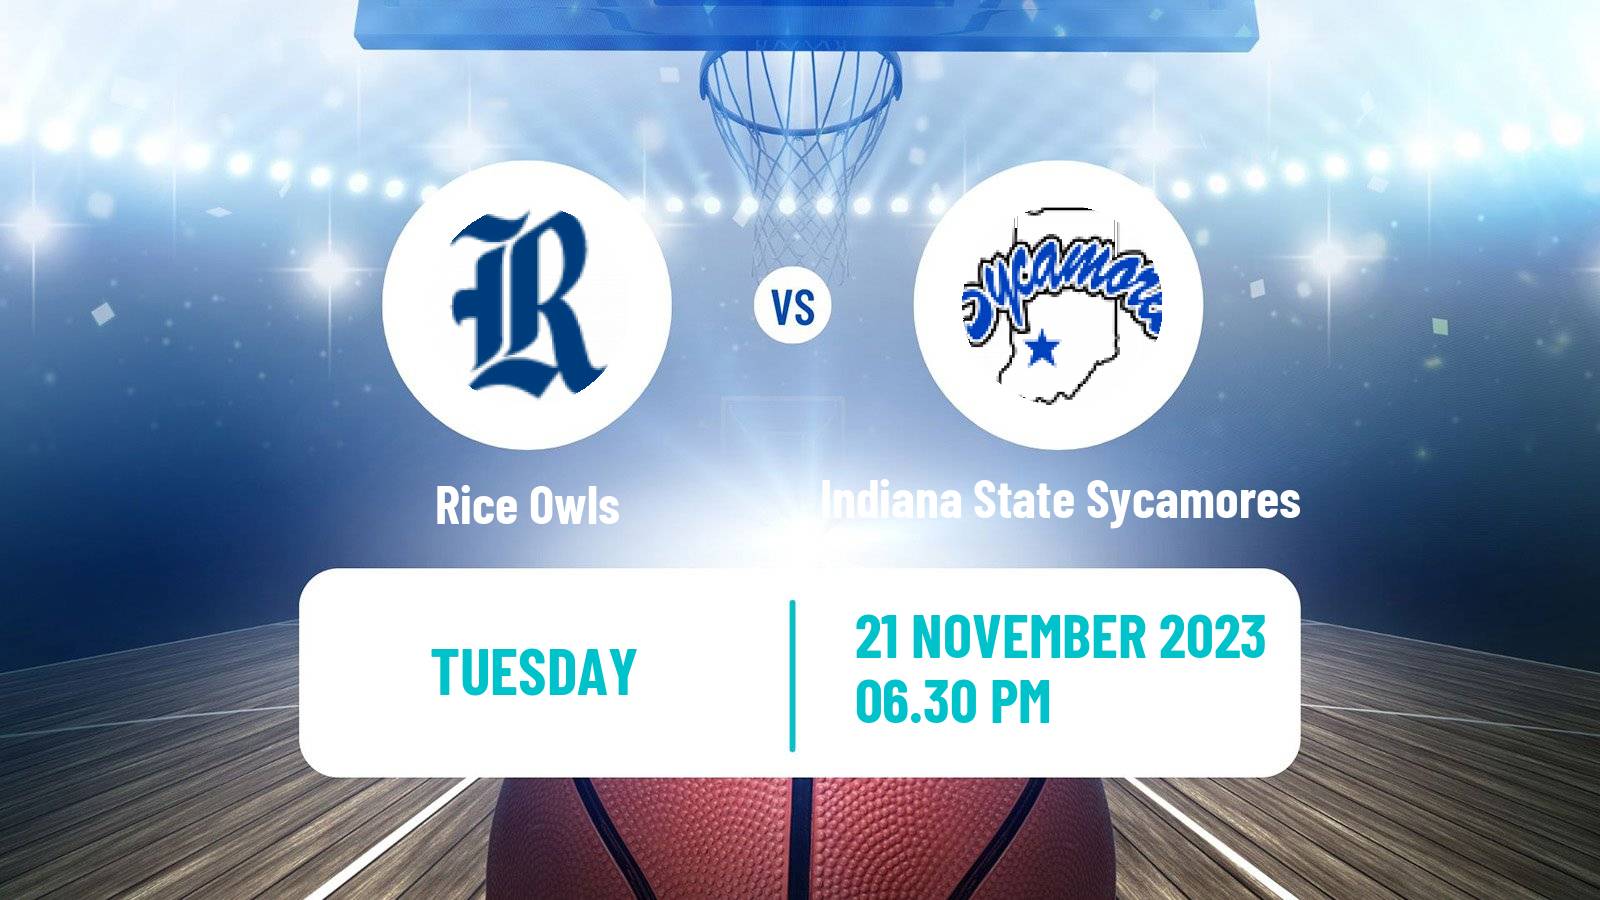 Basketball NCAA College Basketball Rice Owls - Indiana State Sycamores